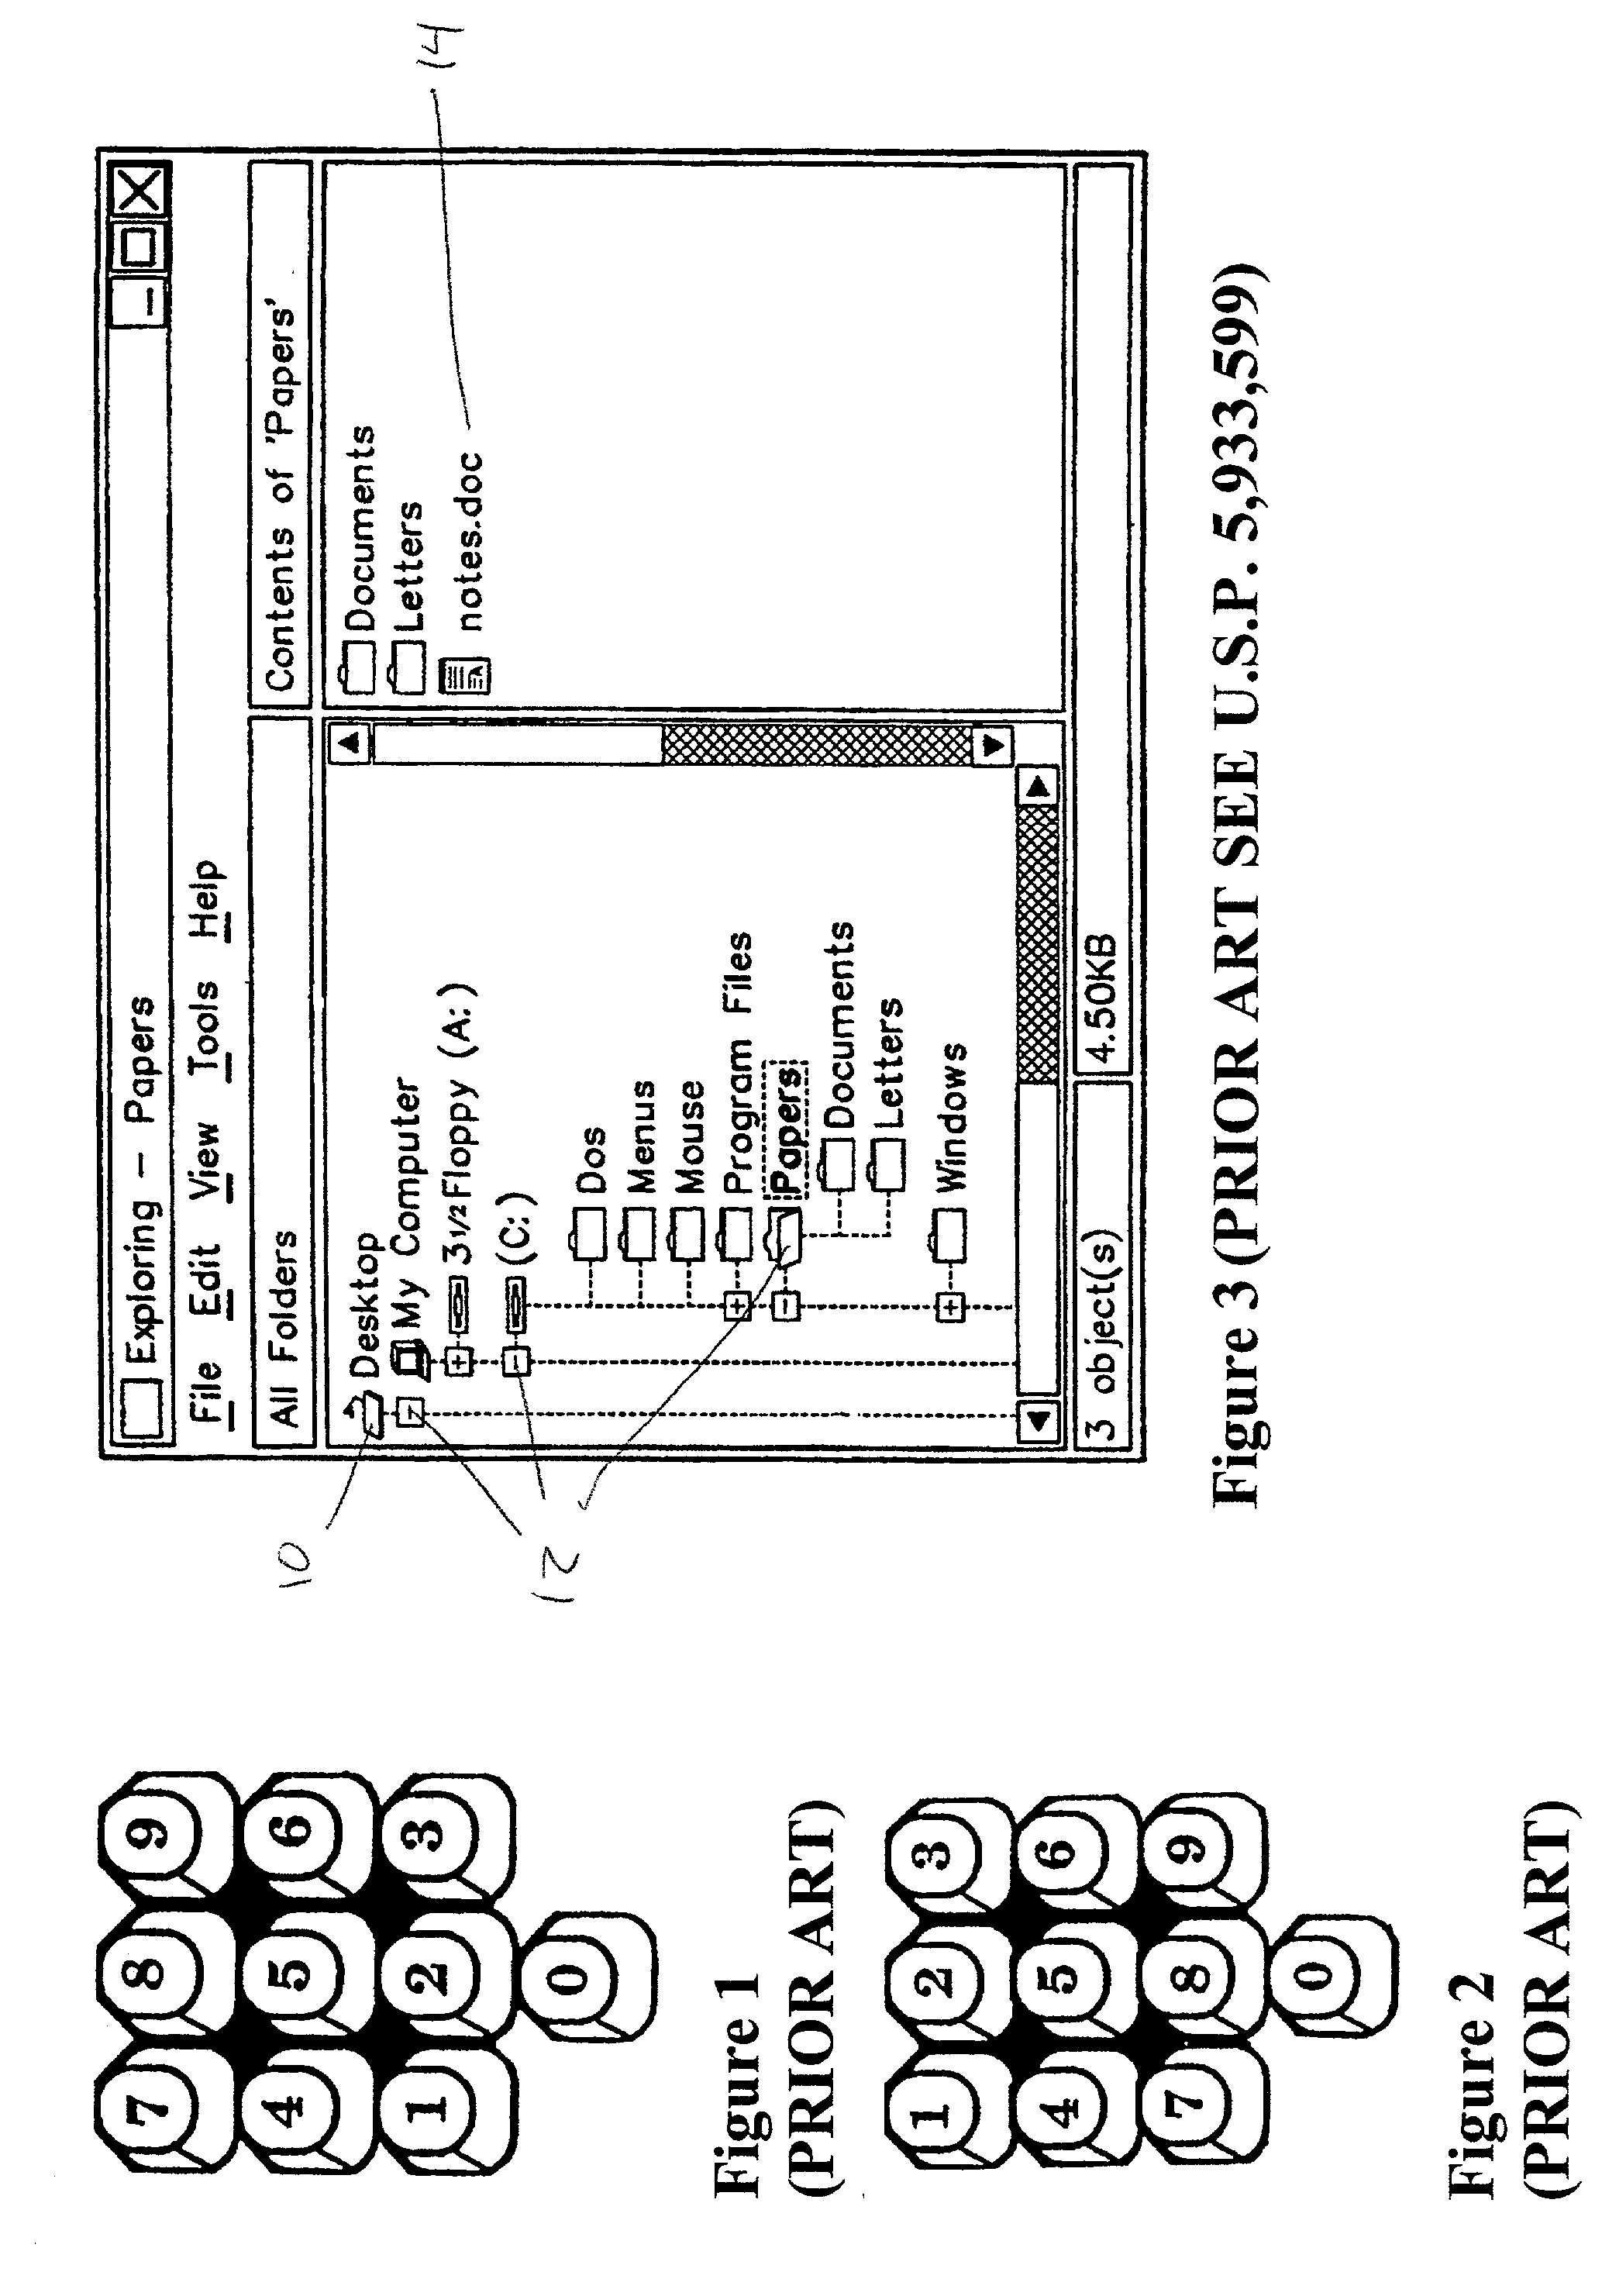 Apparatus and method for navigating electronic files using an array display